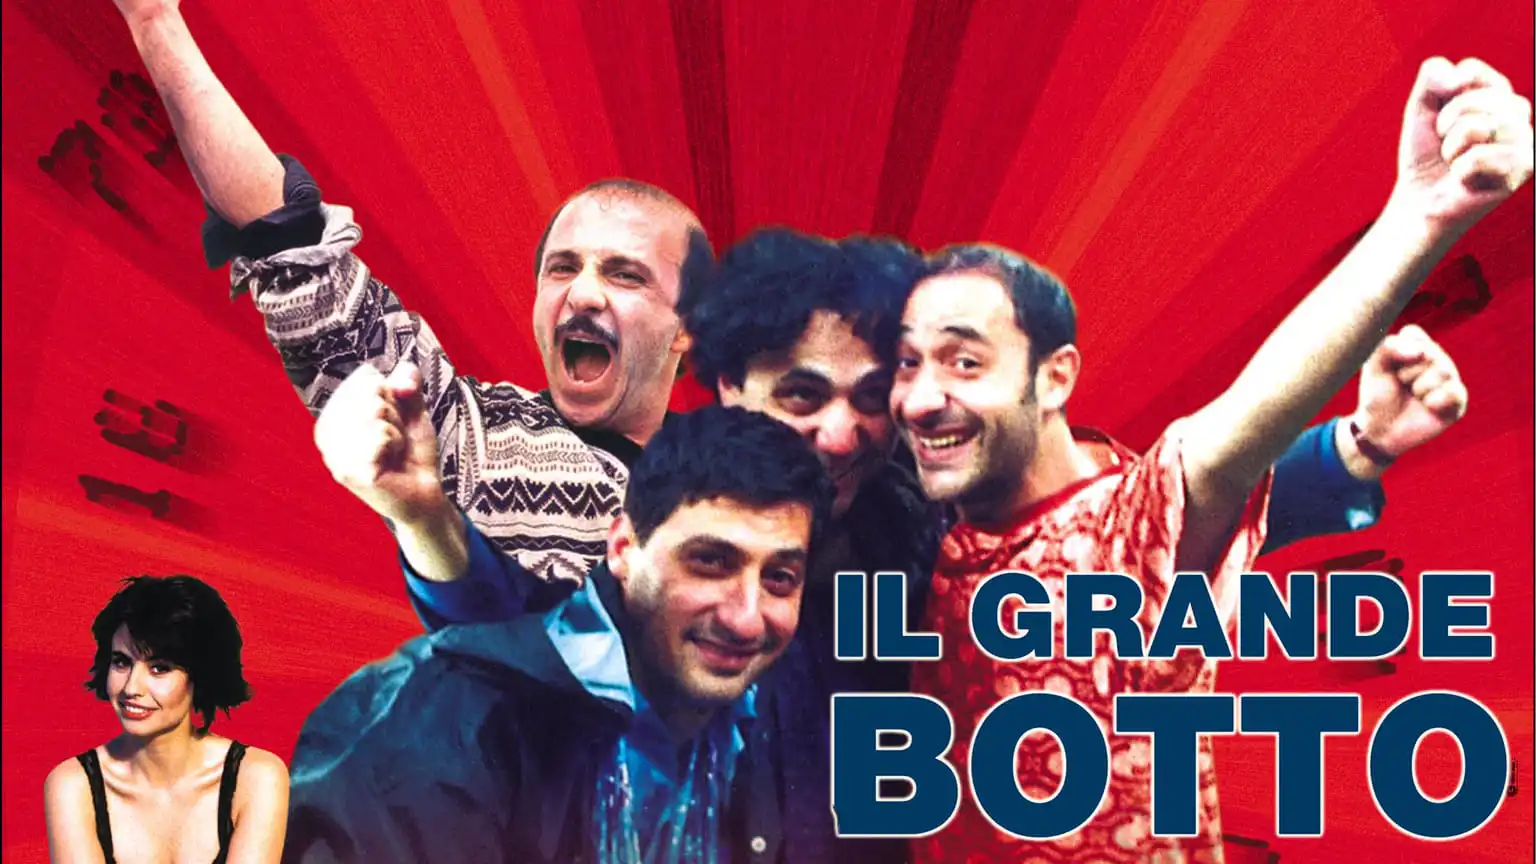 Watch and Download Il grande botto 2